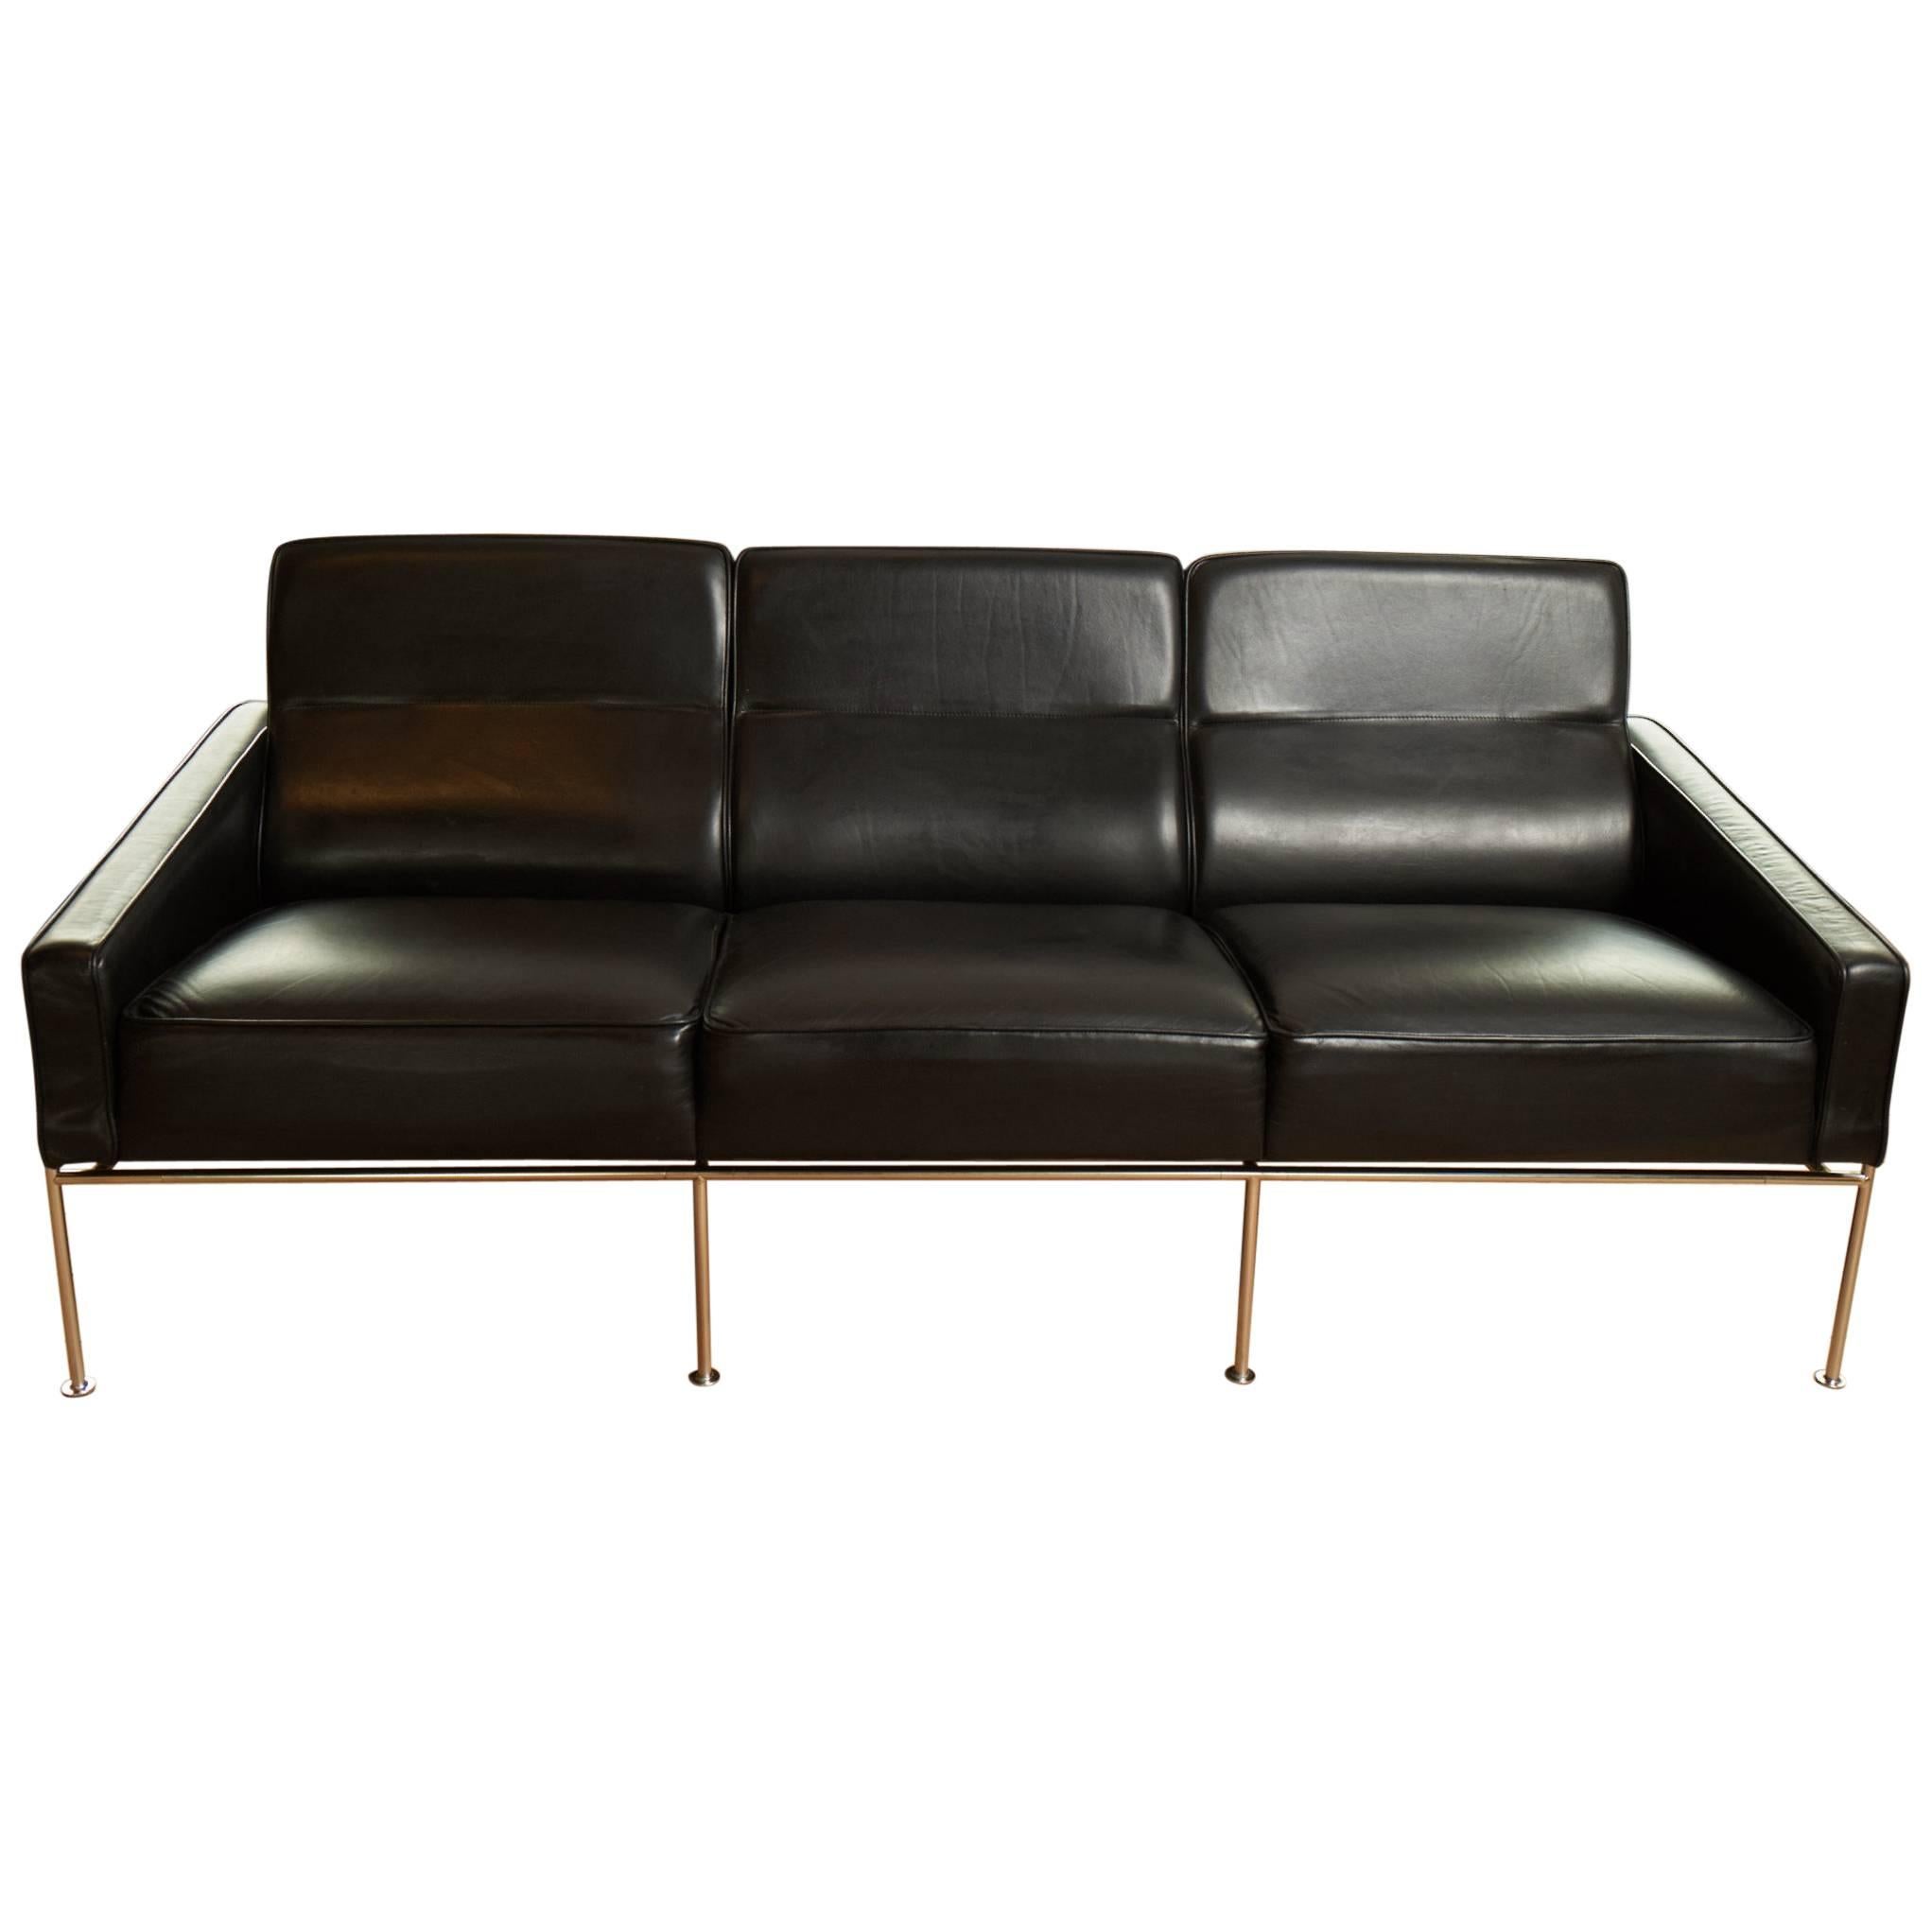 Arne Jacobsen Airport Sofa, Three People For Sale